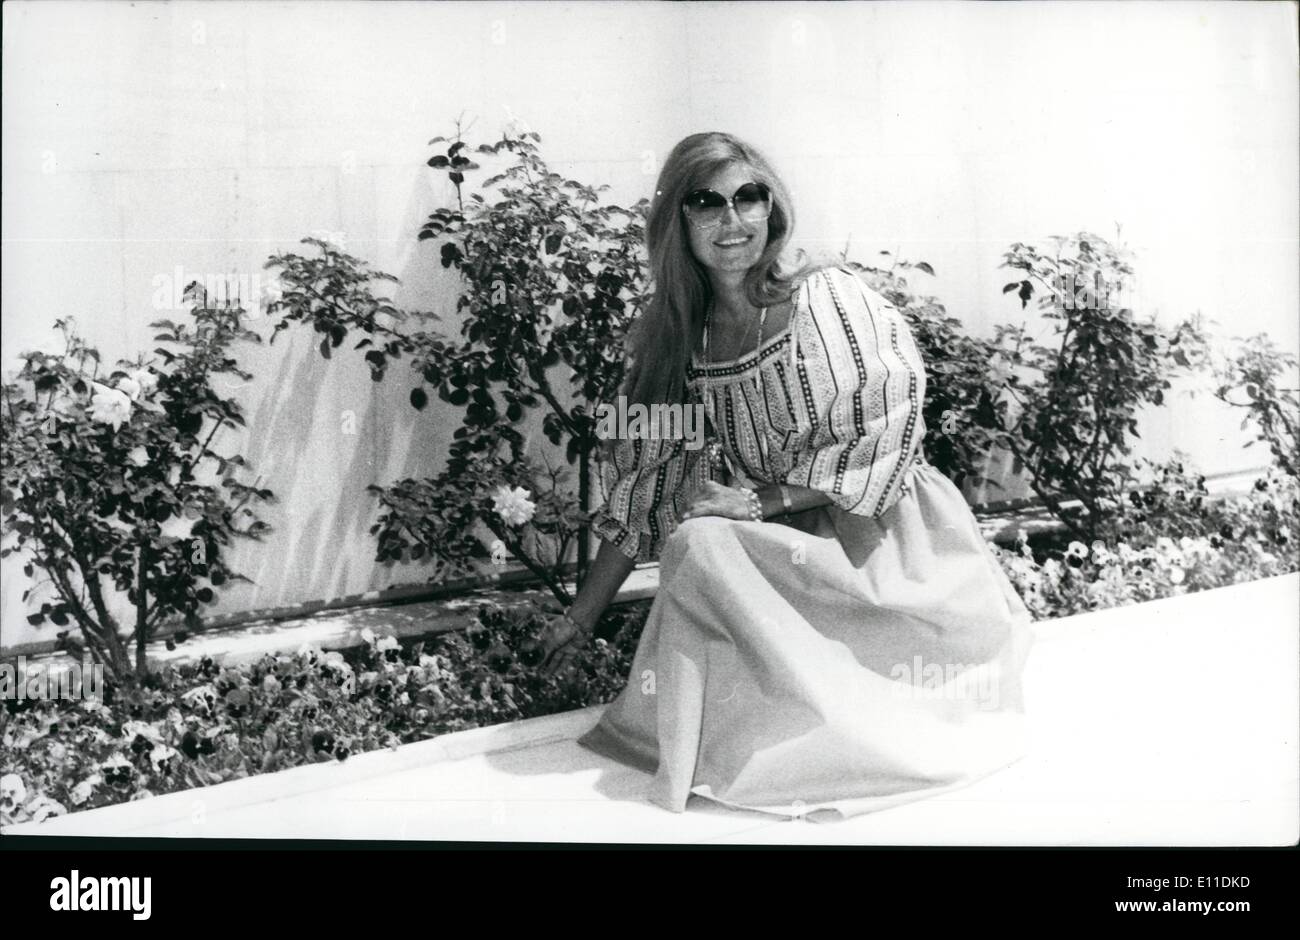 May 05, 1977 - Dalida in Athens for fun and Business: Well-known French Singer and entertainment artist Dalida came to Athens this week to mix business with pleasure. The business part came with an invitation by the Greek National Television network for her to make a one-hour musical spectacular exclusively with a Greek background. The singer however also seized the chance to add on a few more days purely for a bit of relaxation under the Greek sun. Newsmen appeared to be interested above all in her political beliefs. Questioned at Athens airport she said: Politics mean very little to me Stock Photo